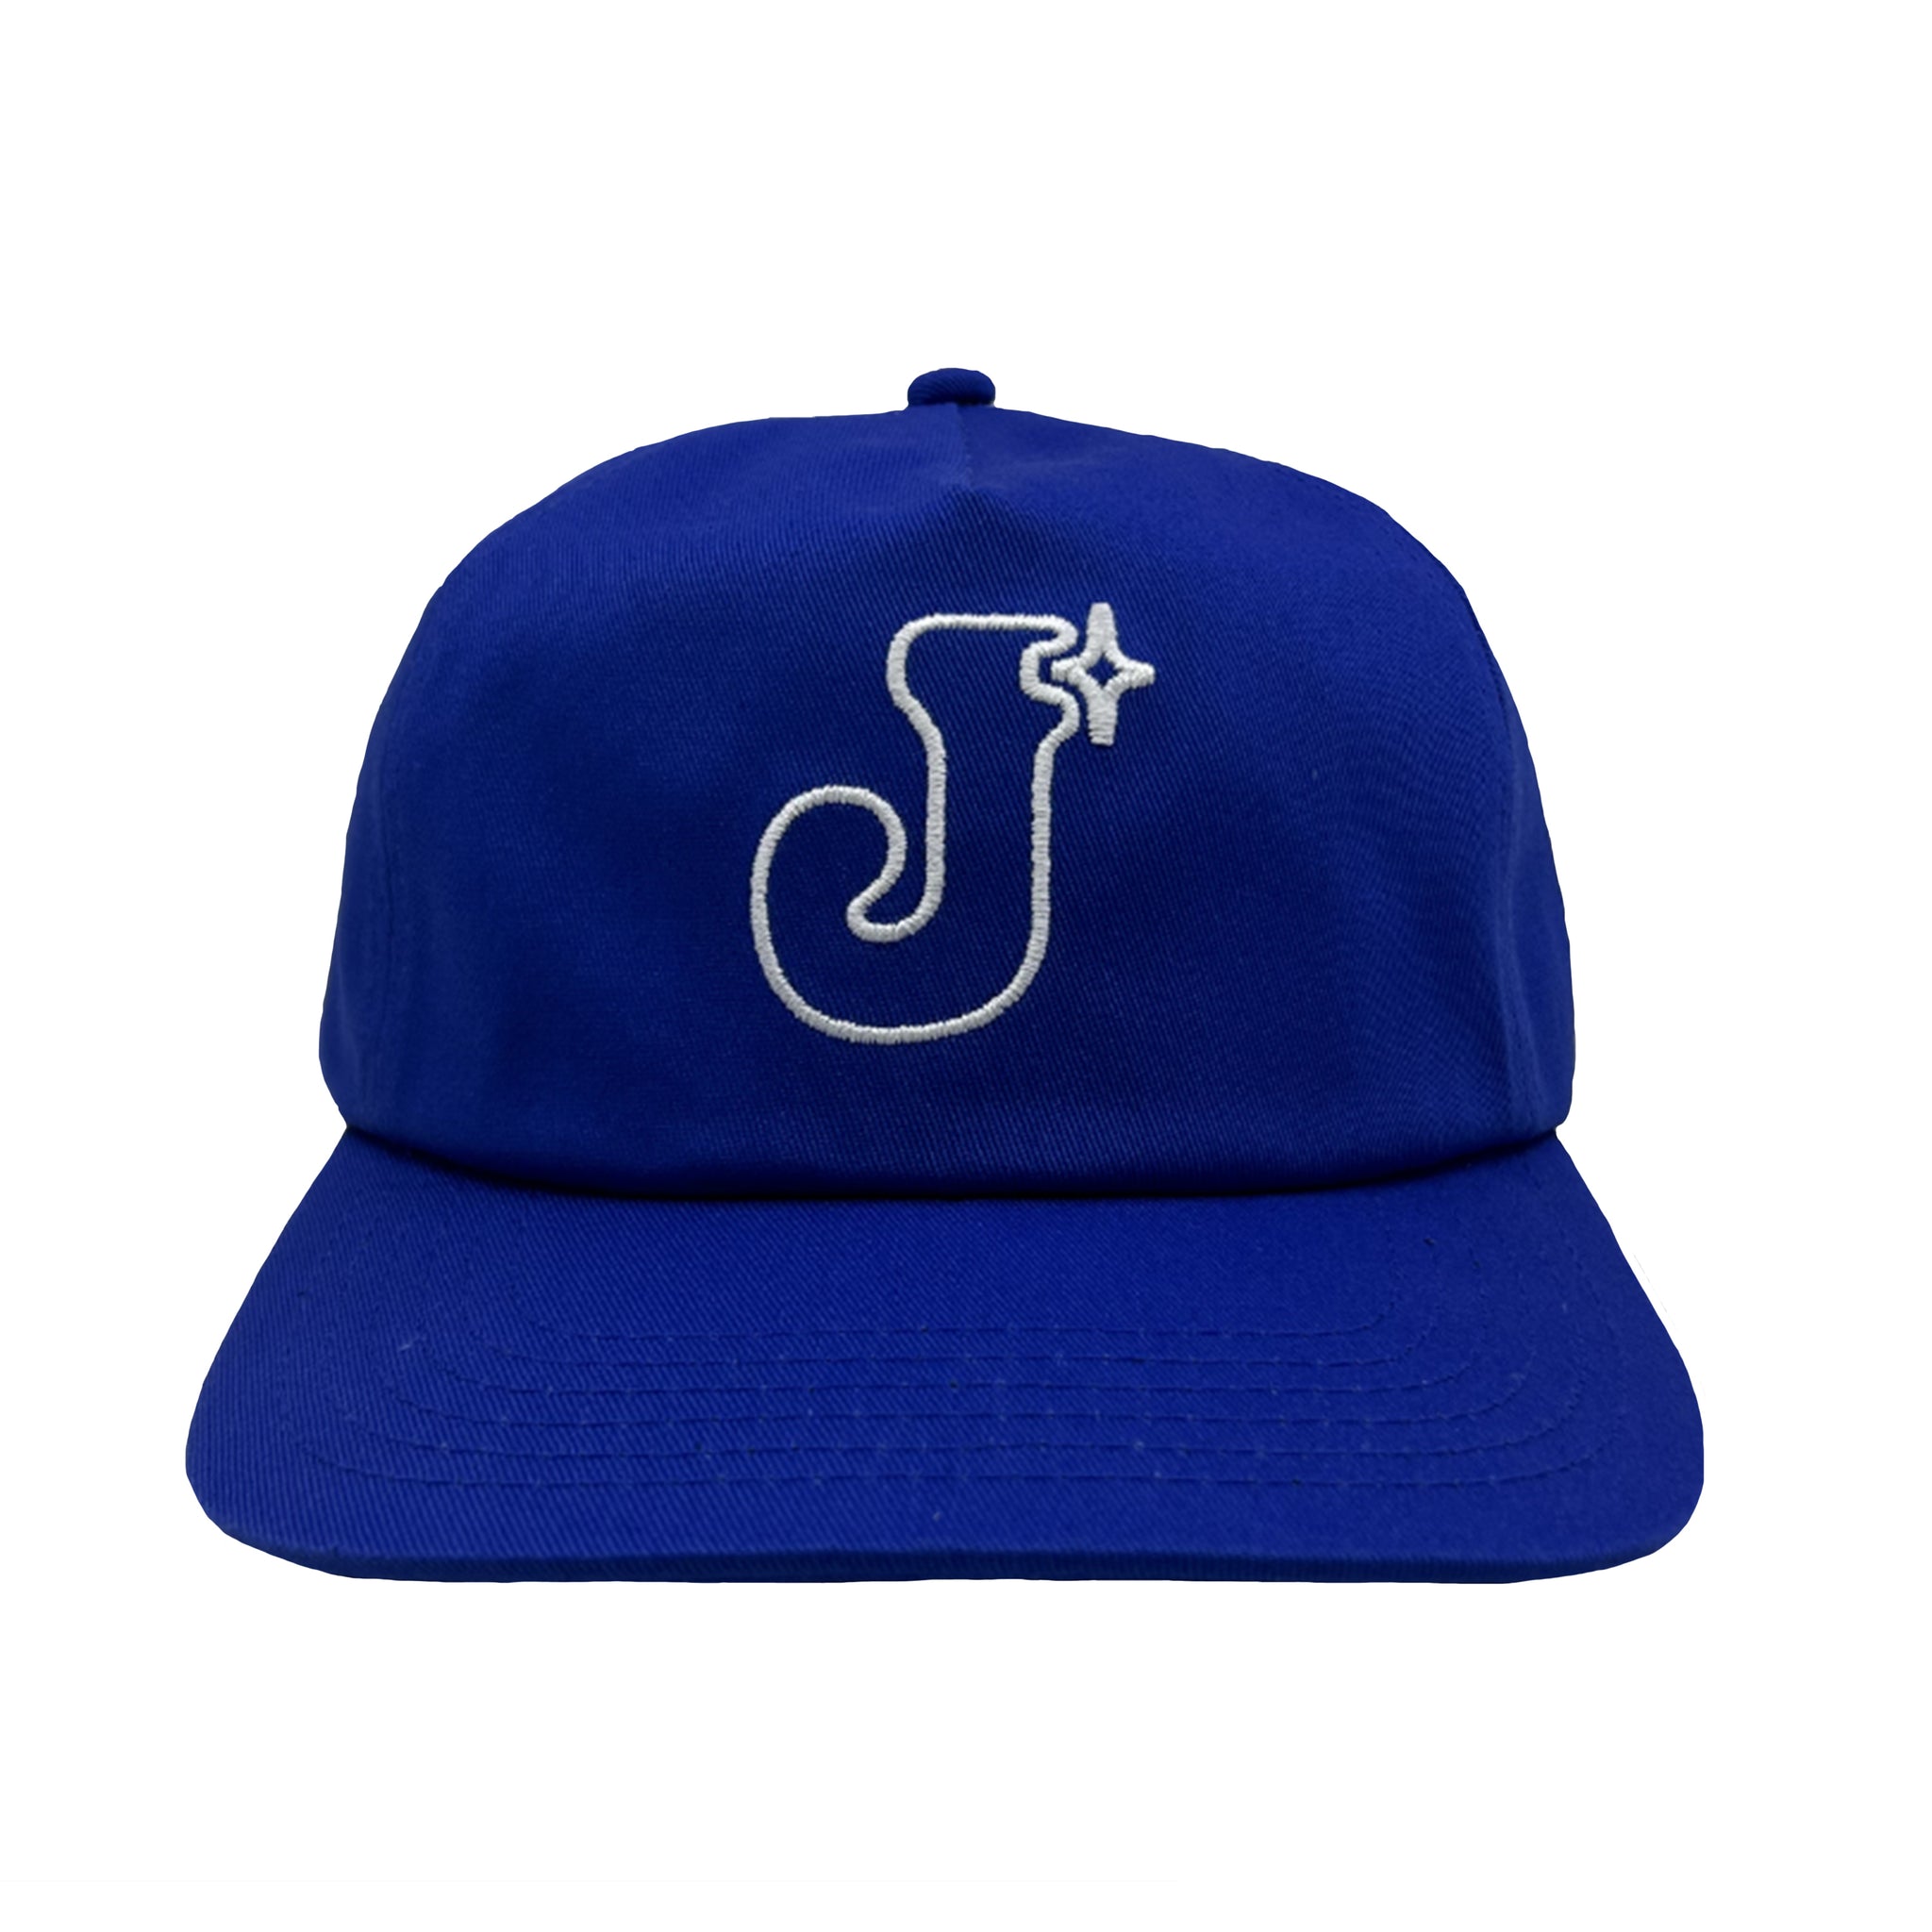 The JAWNY Hat